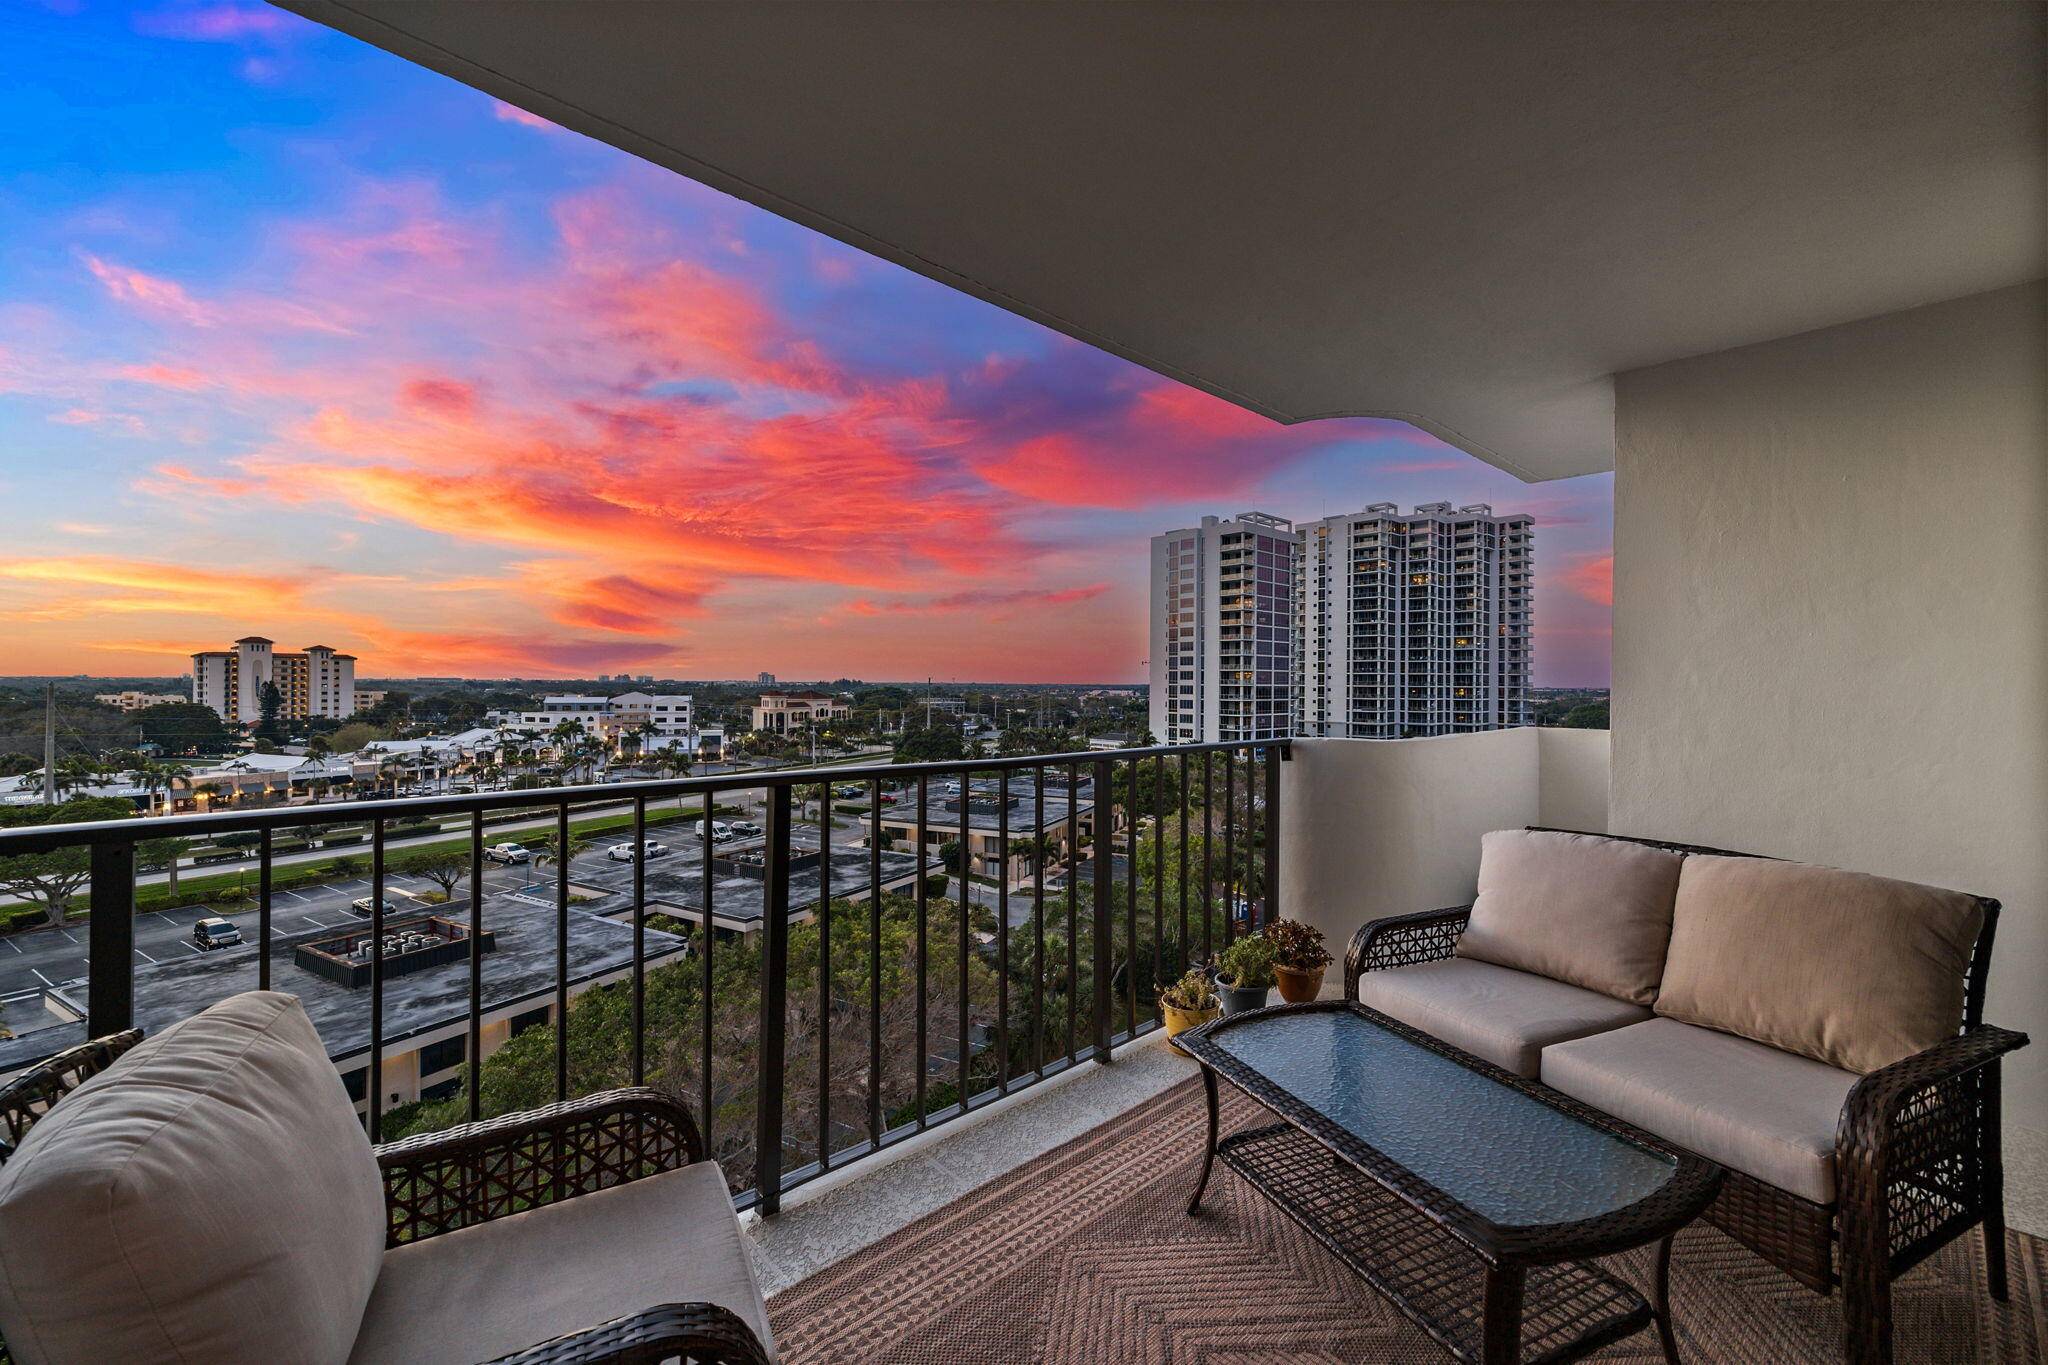 Welcome to this cozy 10th floor condo, where you'll find beautiful sunset and city skyline views to greet you.